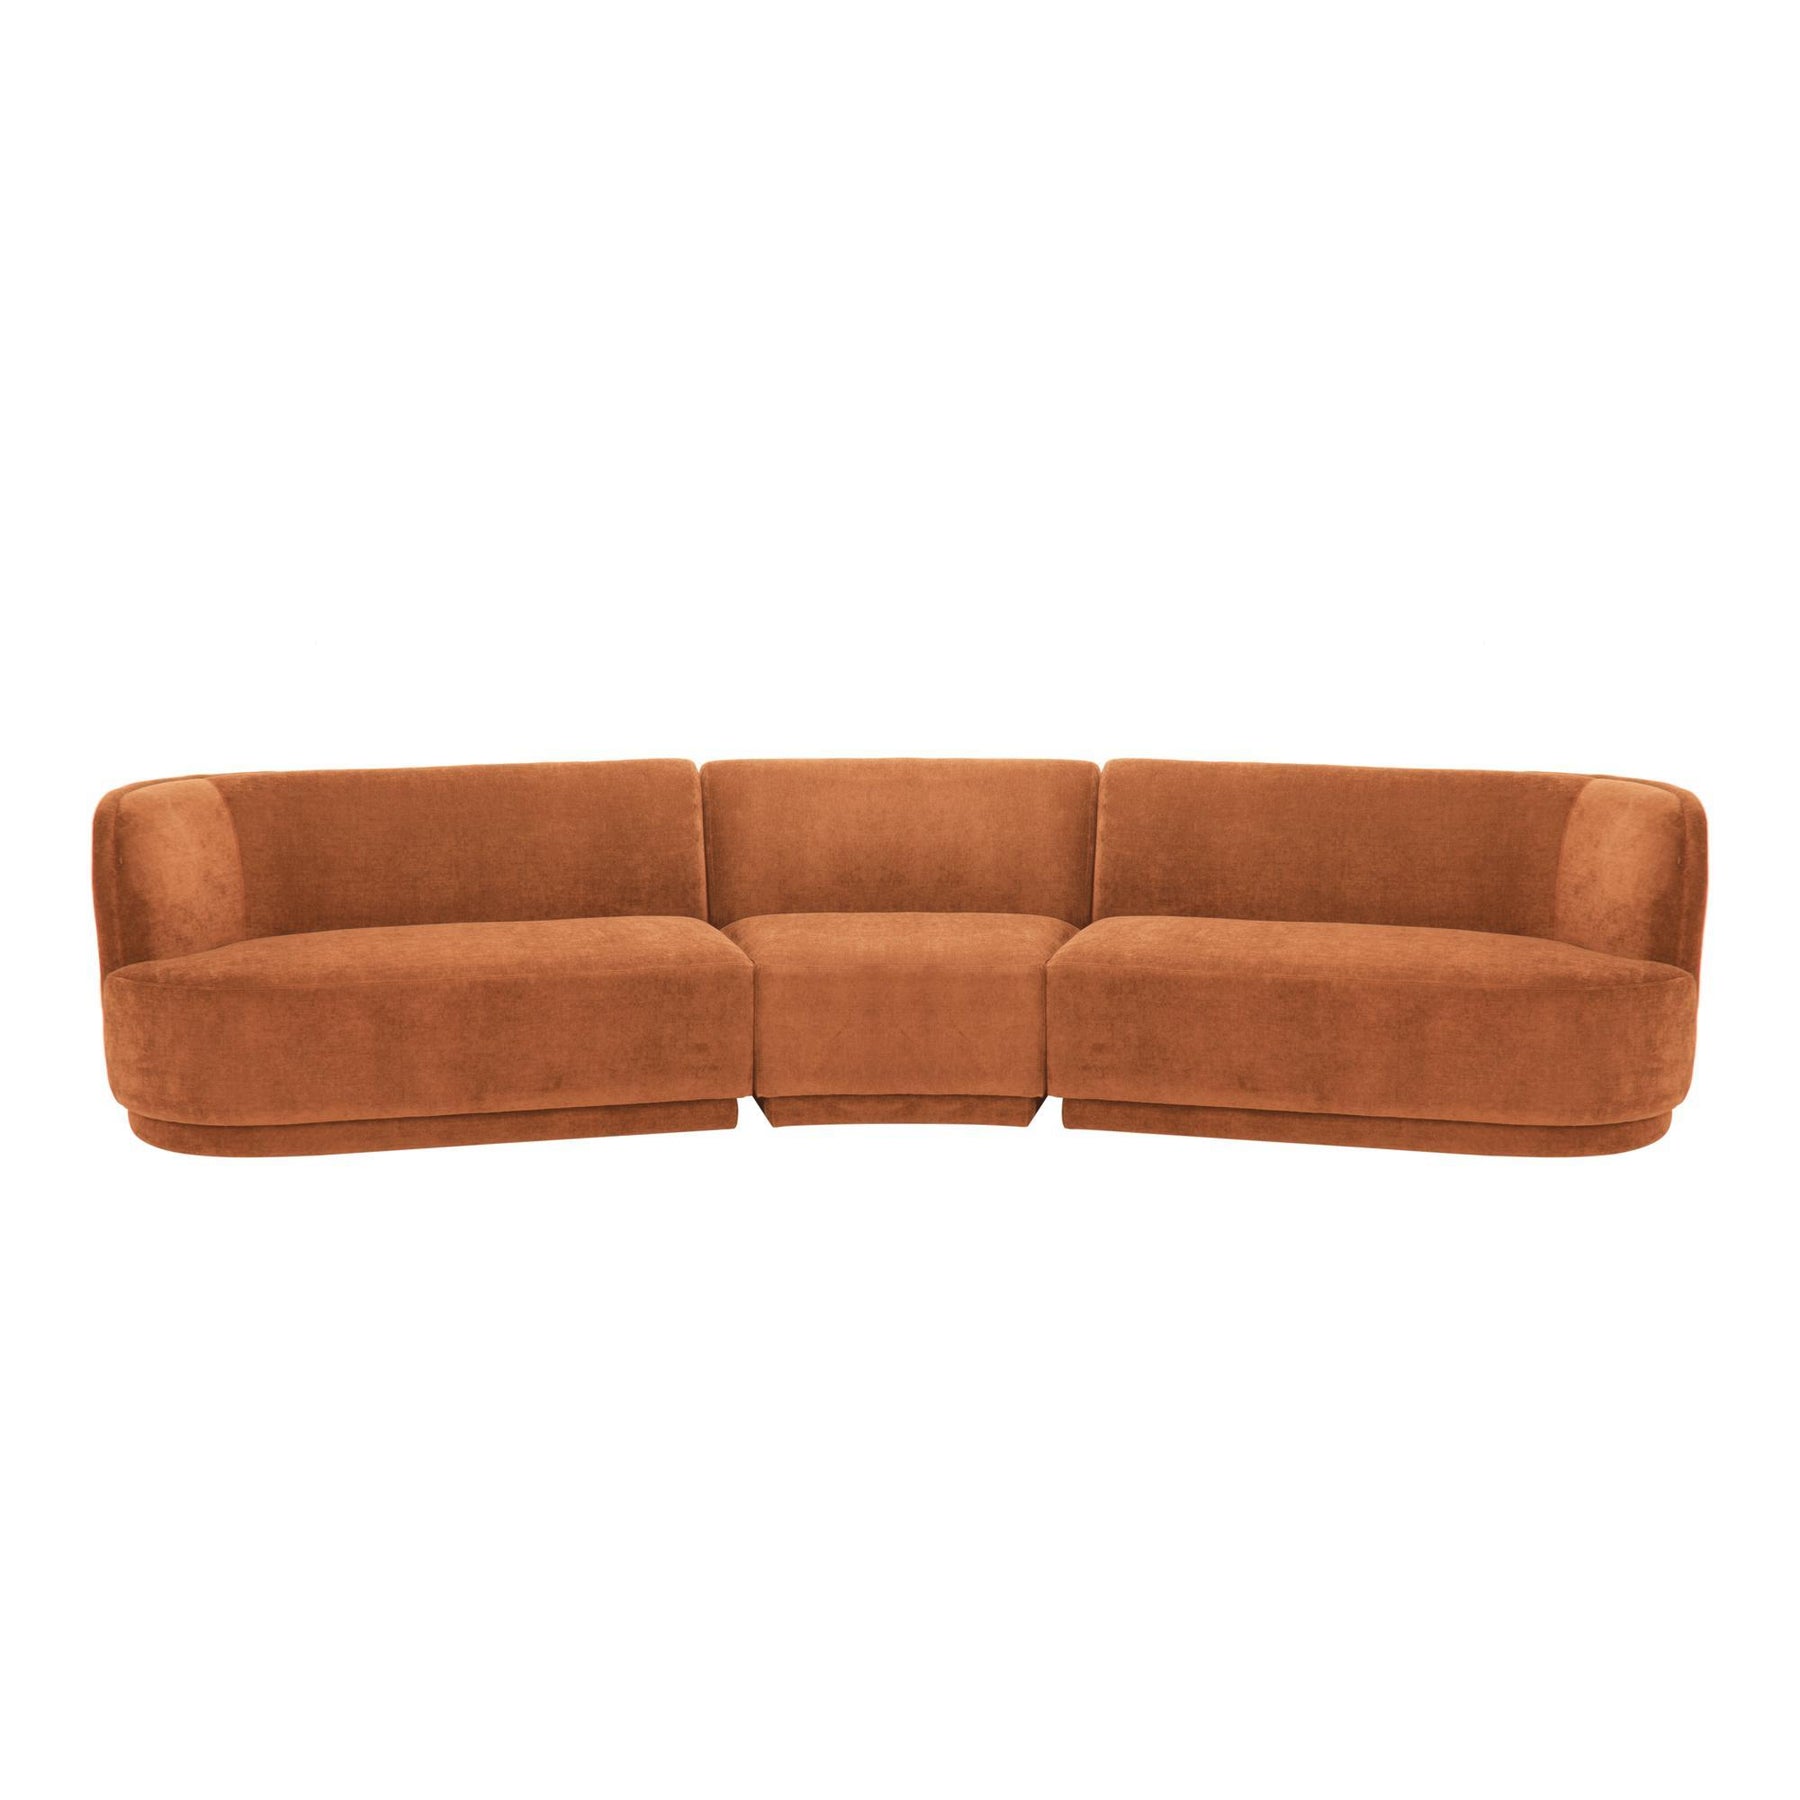 Moe's Home Collection Yoon Compass Modular Sectional Fired Rust - JM-1021-06